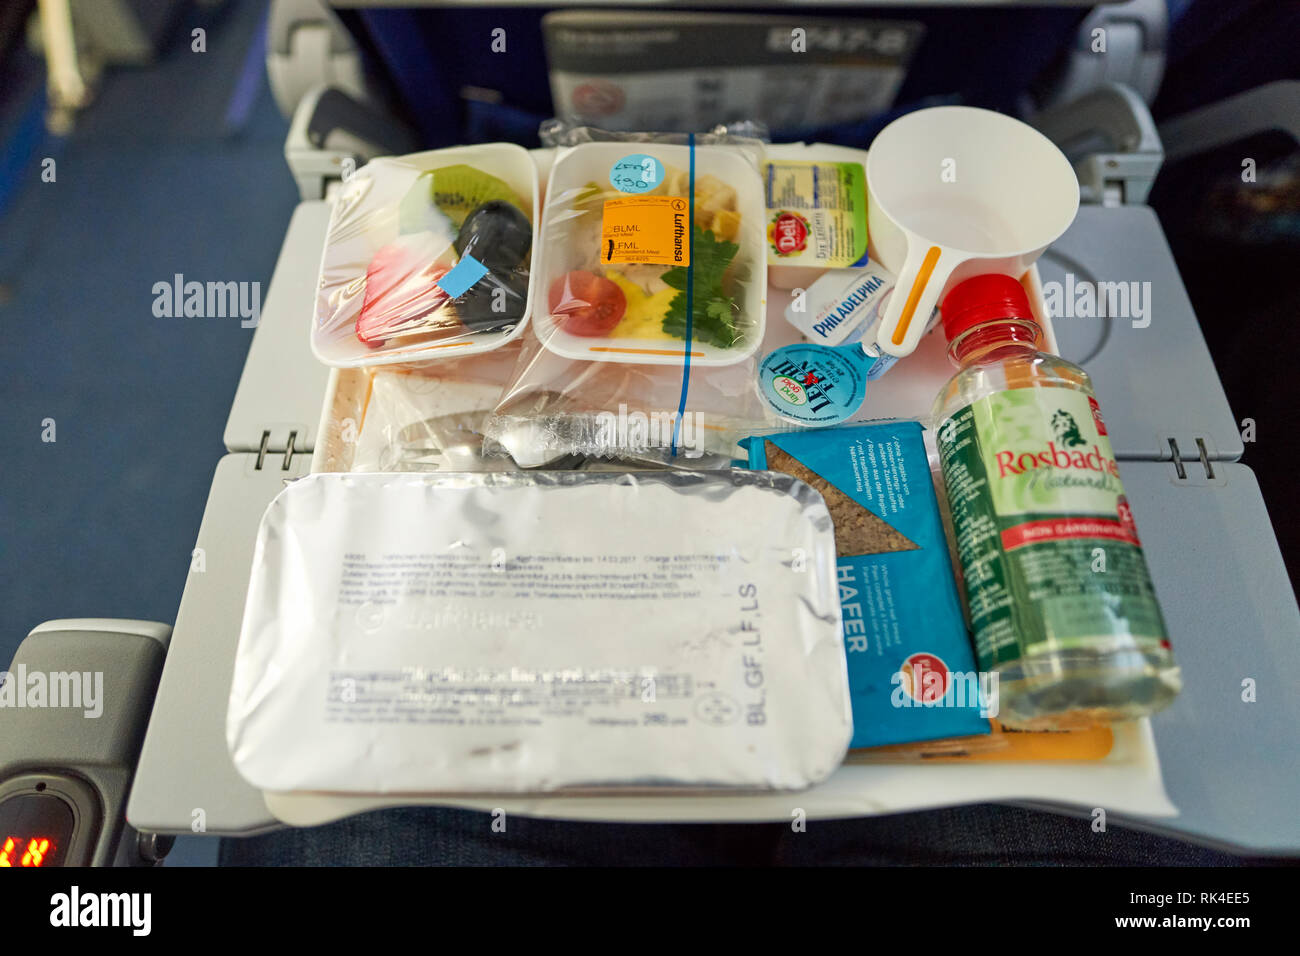 FRANKFURT, GERMANY - MARCH 13, 2016: close up shot of meal at Lufthansa Boeing 747-8 economy class.  Deutsche Lufthansa AG, commonly known as Lufthans Stock Photo